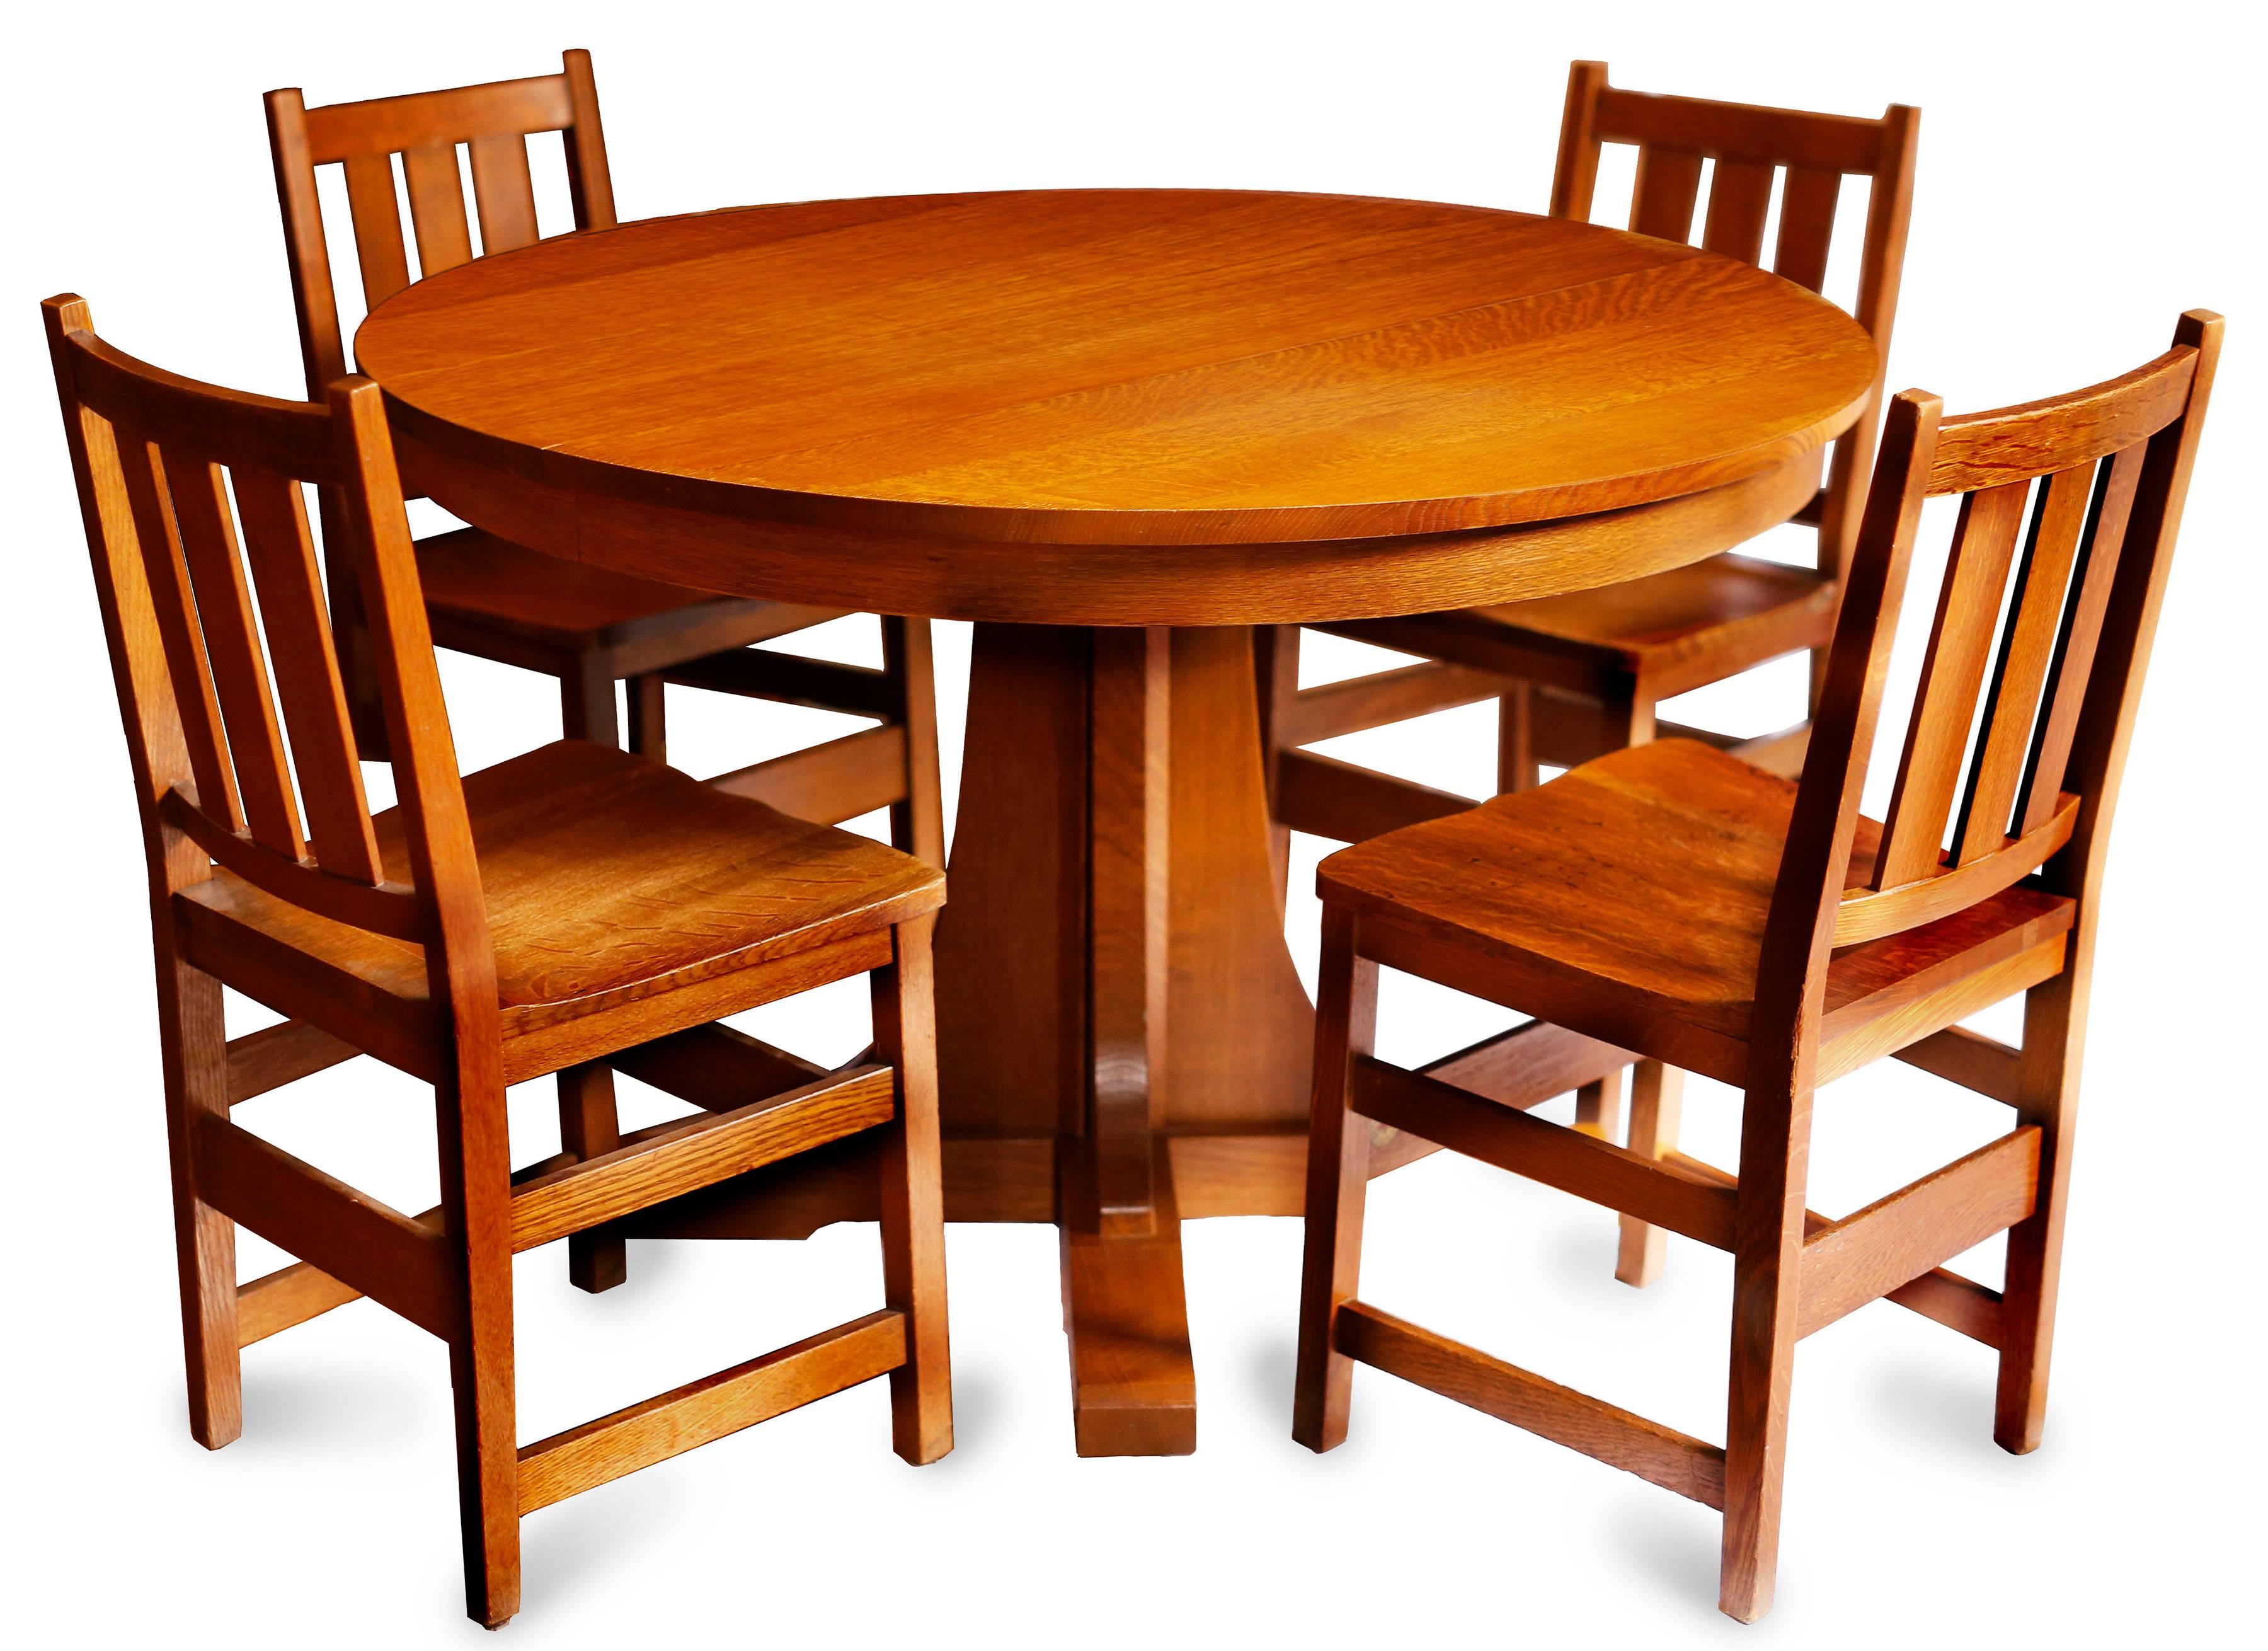 Mission Andy Warhol's 6 Stickley Chairs from the Factory and Contemporary Stickley Table